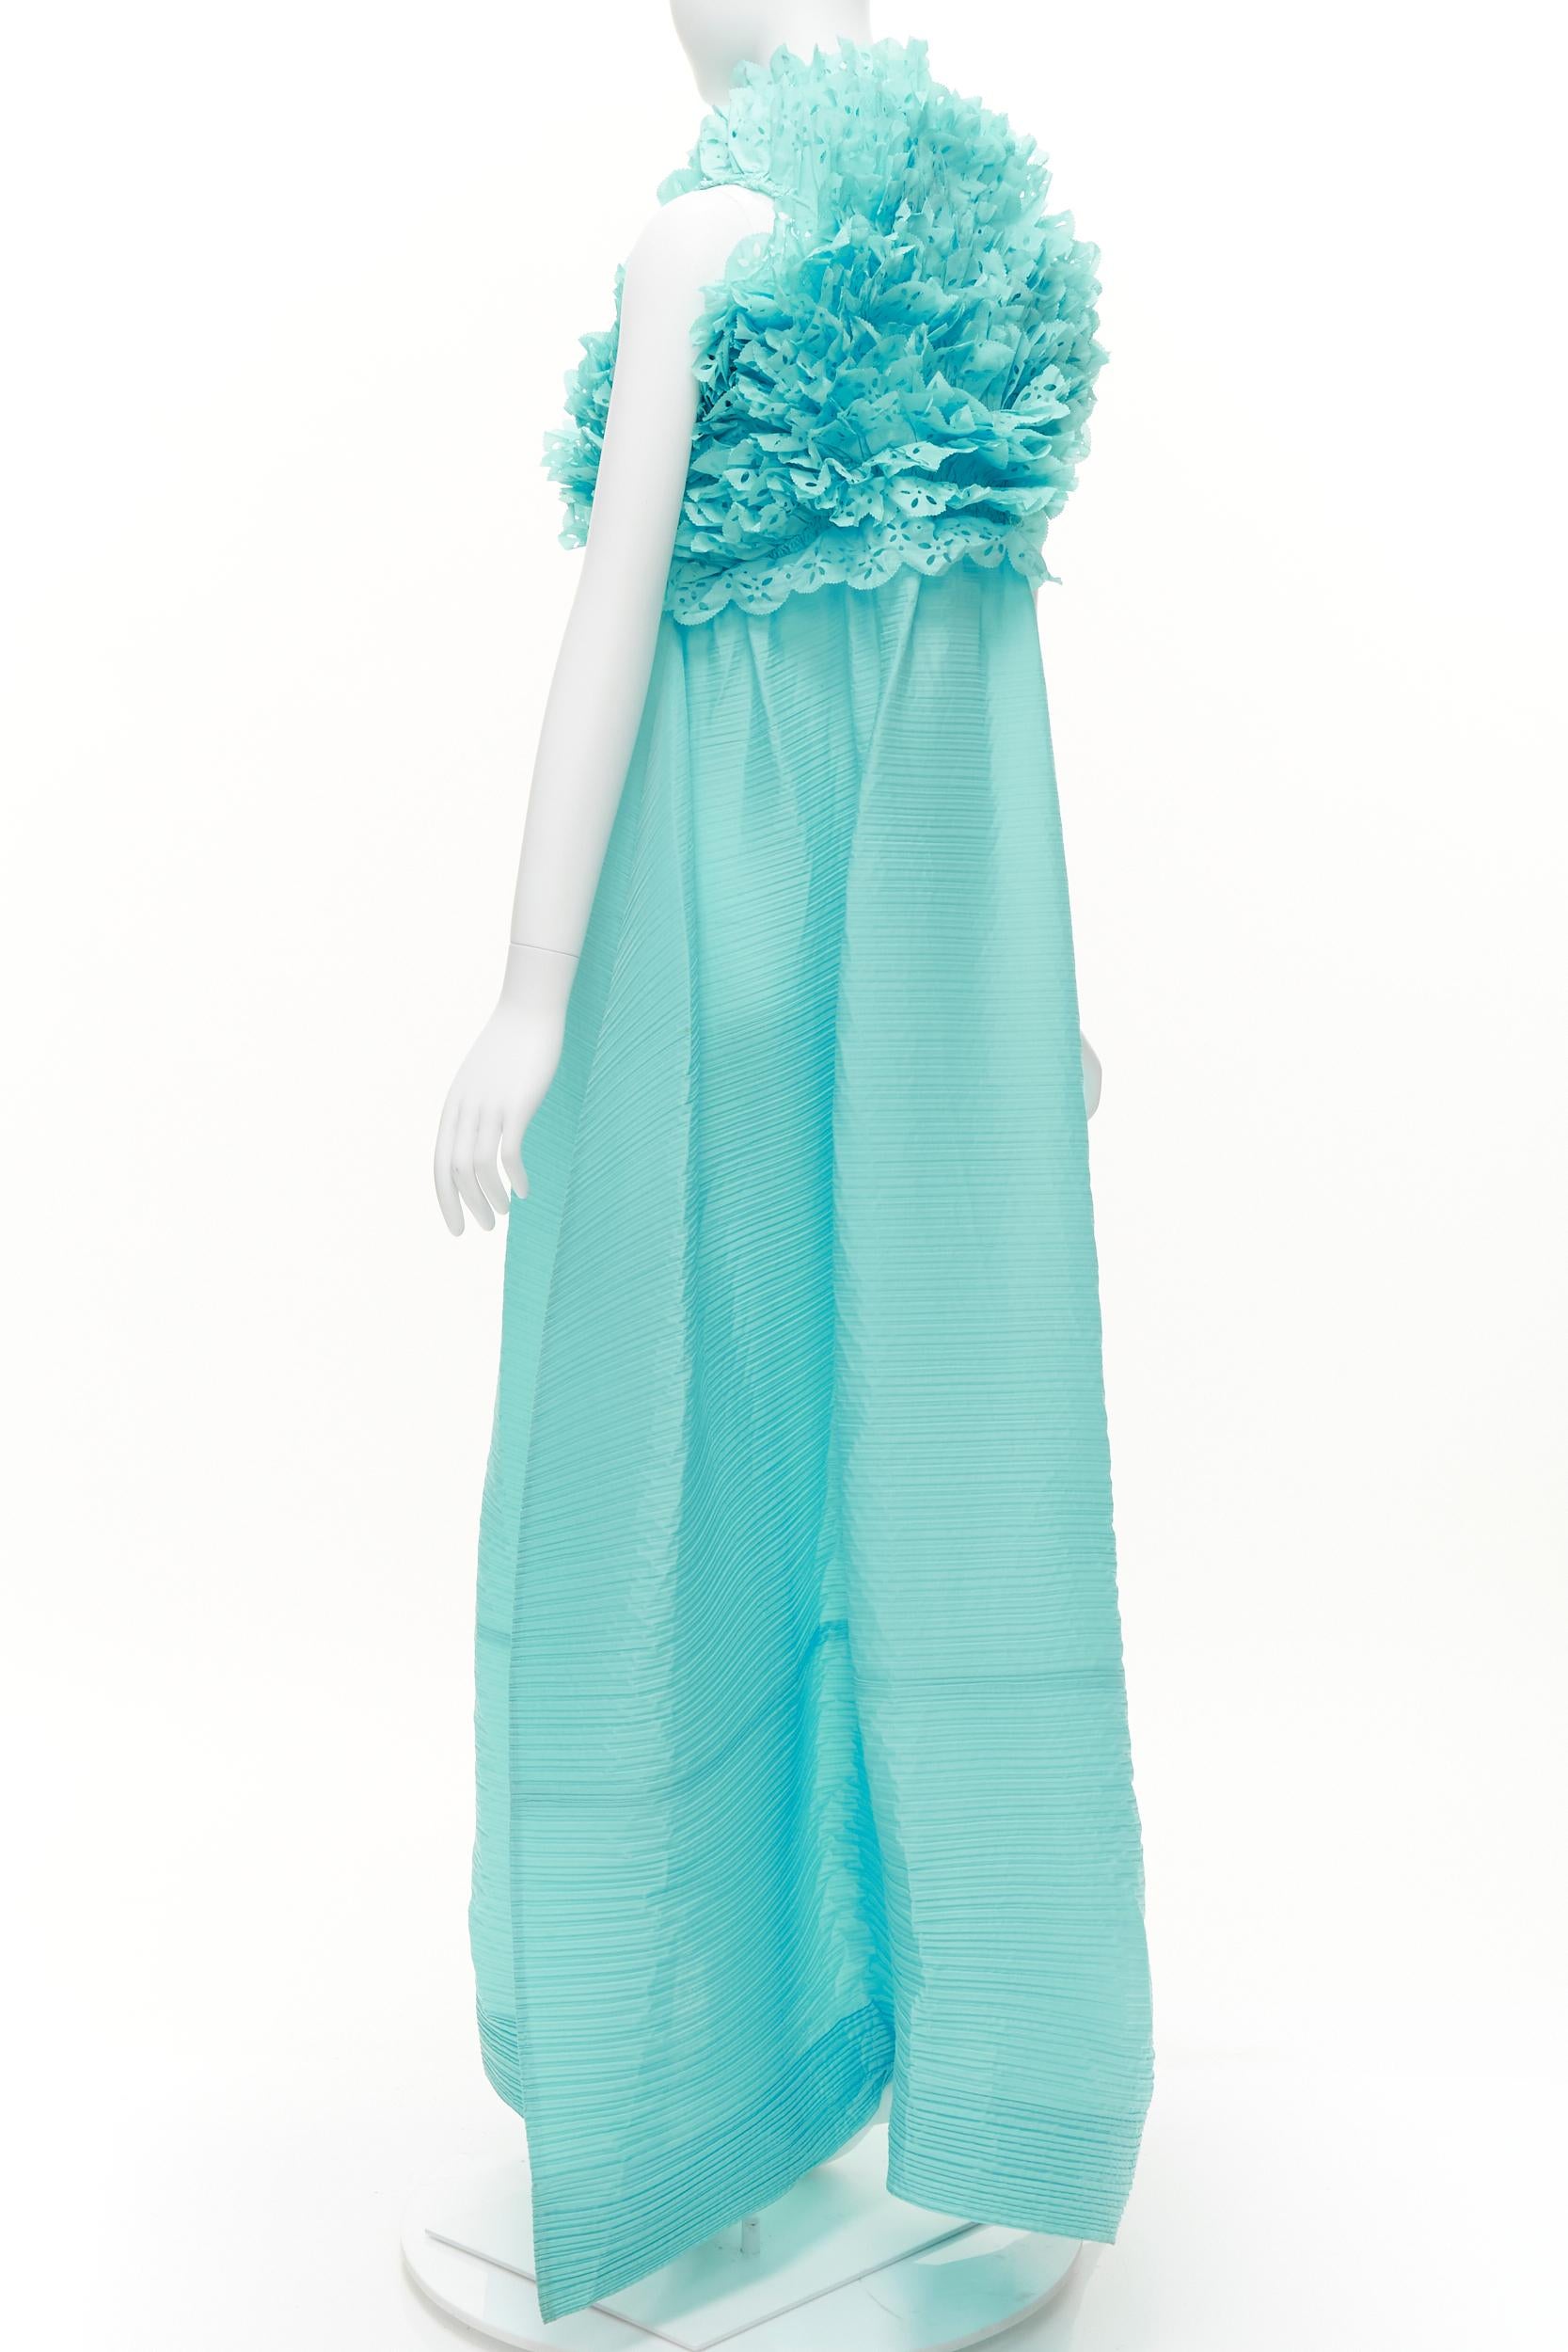 rare ISSEY MIYAKE sky blue laser cut ruffle high neck evening gown dress M For Sale 2